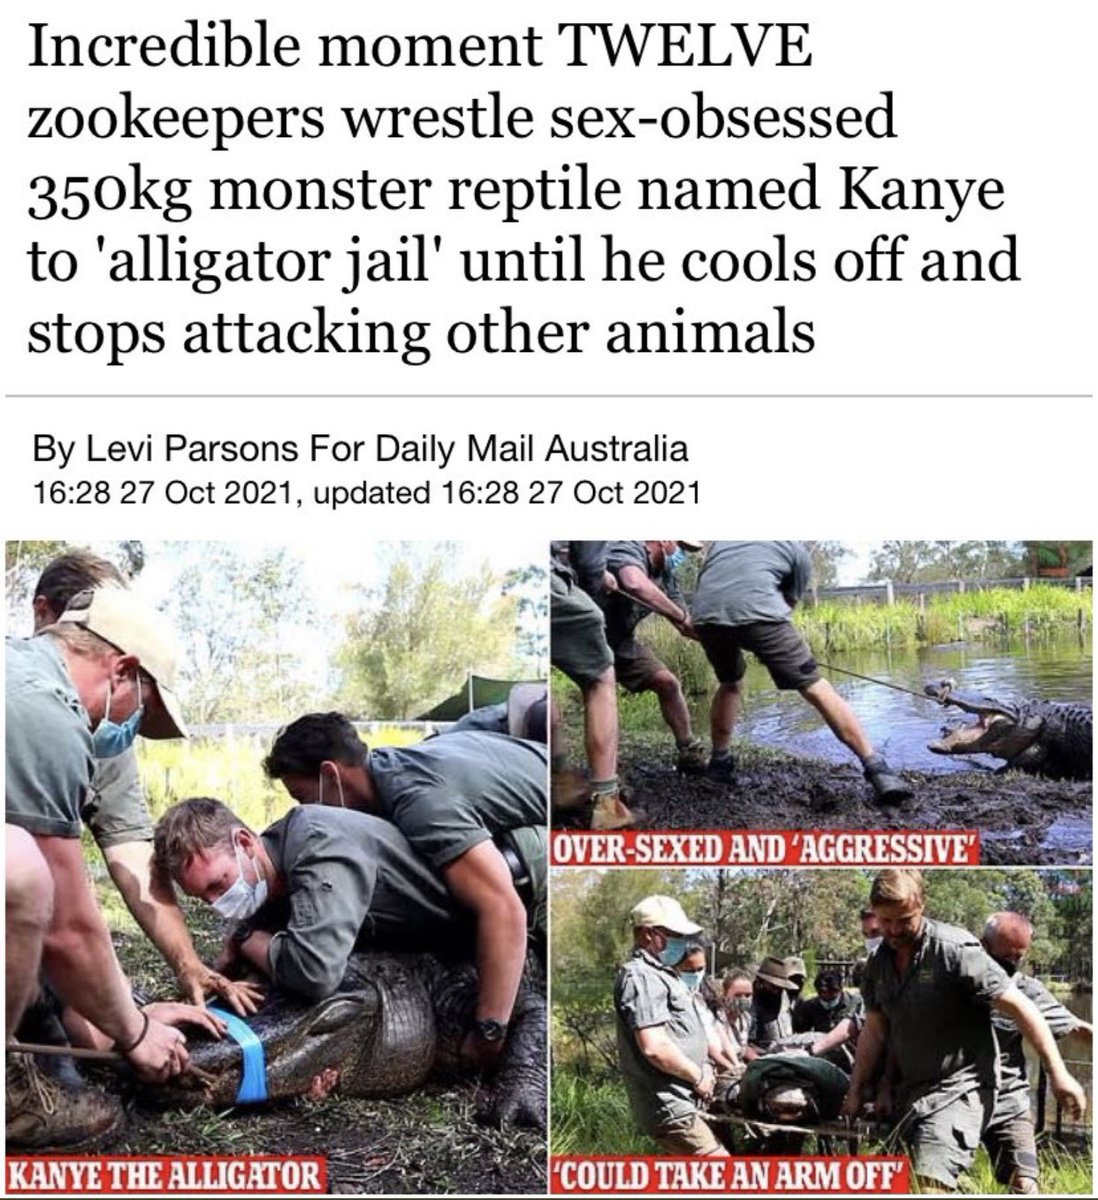 dudes posting wins - sex obsessed kanye alligator - Incredible moment Twelve zookeepers wrestle sexobsessed g monster reptile named Kanye to 'alligator jail' until he cools off and stops attacking other animals By Levi Parsons For Daily Mail Australia , u